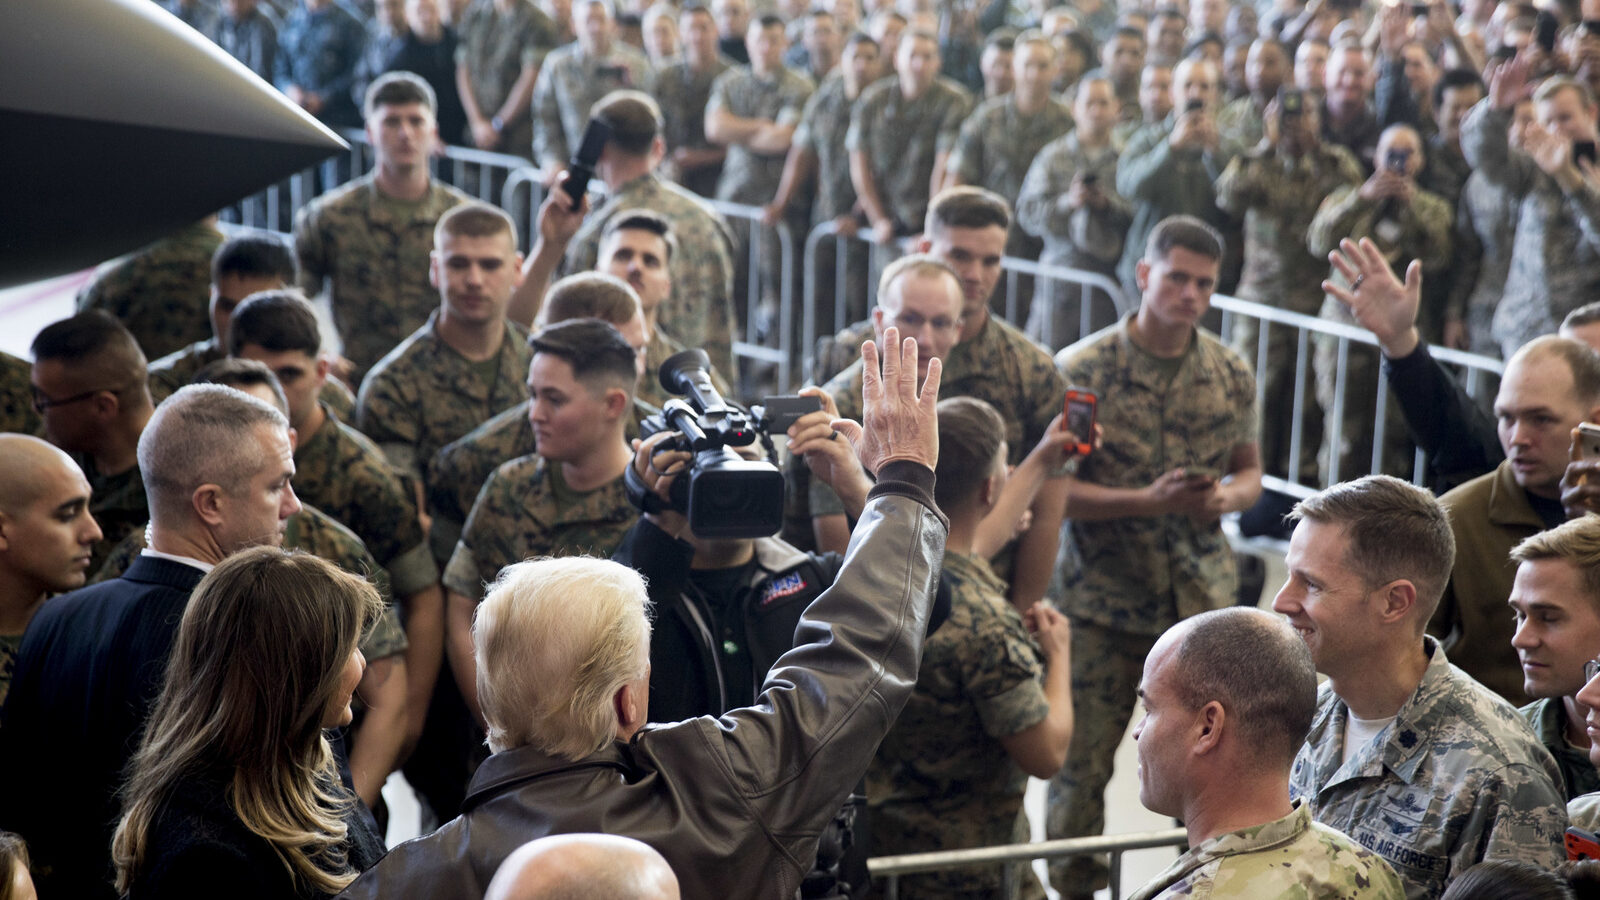 President Donald Trump, accompanied by first lady Melania Trump, left, waves to the crowd of members of the military as he speaks at a hanger rally at Yokota Air Base, Nov. 5, 2017, in Fussa, on the outskirts of Japan. (AP/Andrew Harnik)